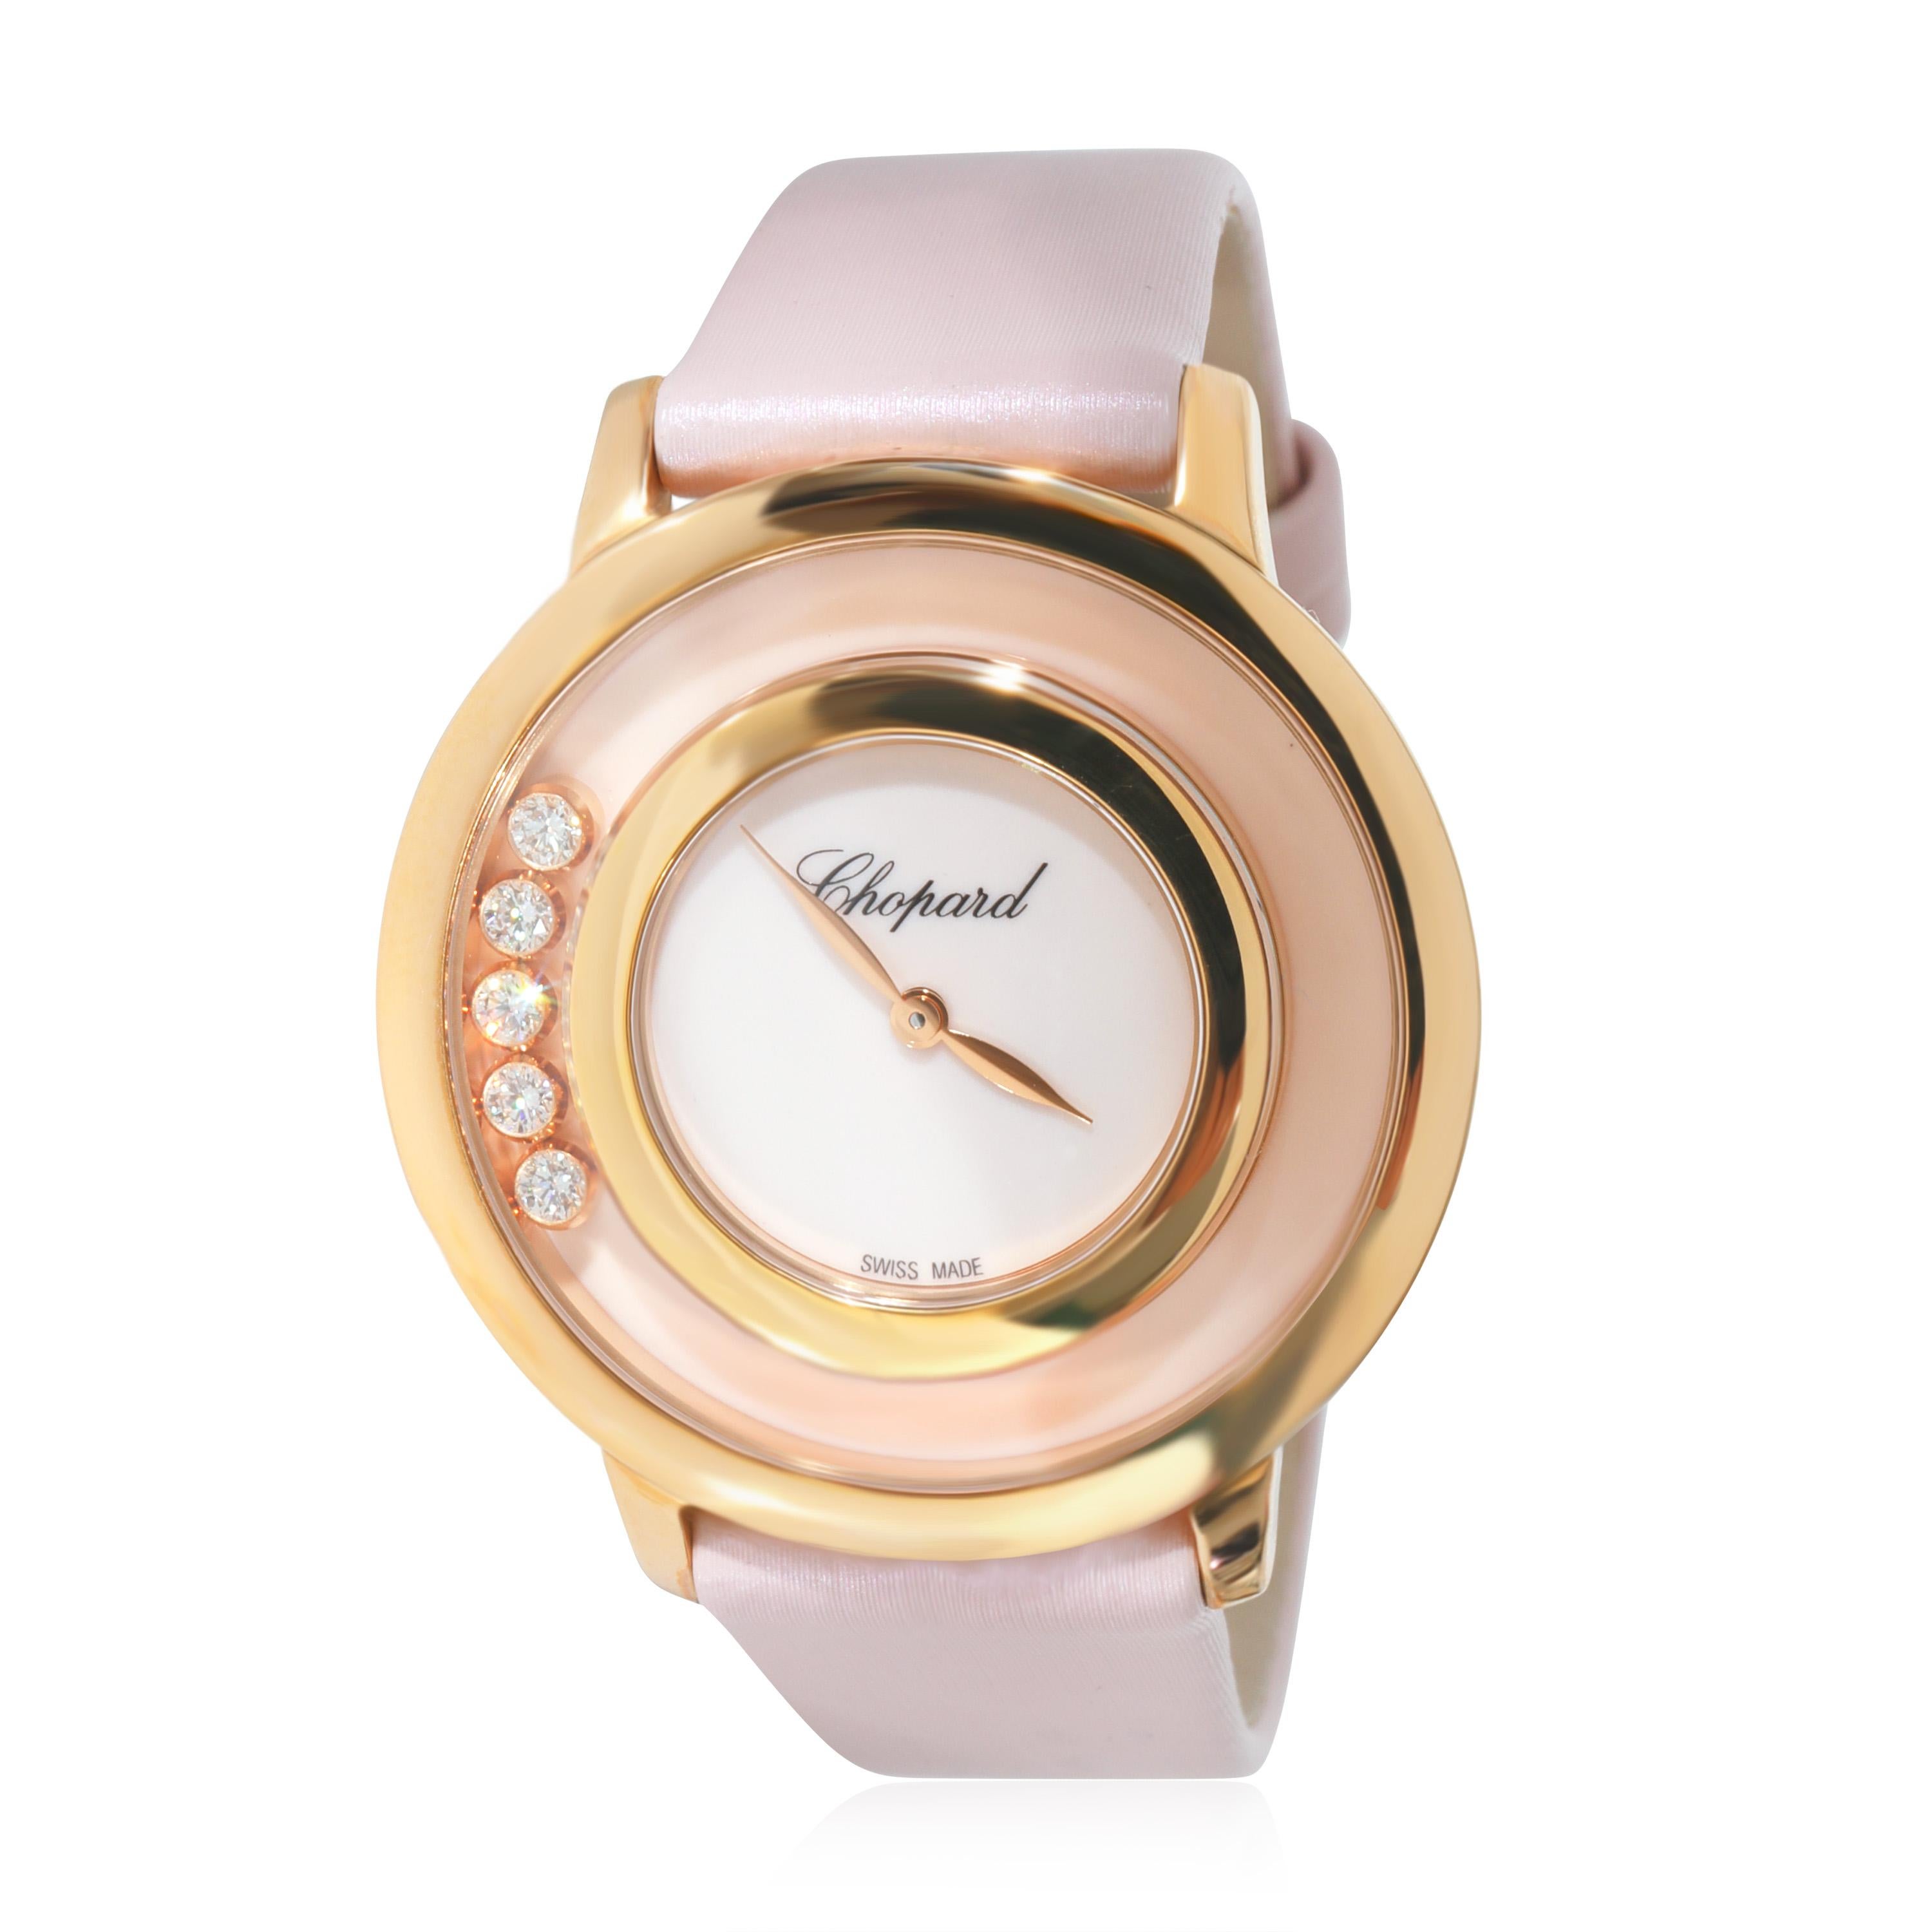 Chopard Happy Diamonds 209429-5106 Women's Watch in 18 Karat Rose Gold In Excellent Condition For Sale In New York, NY